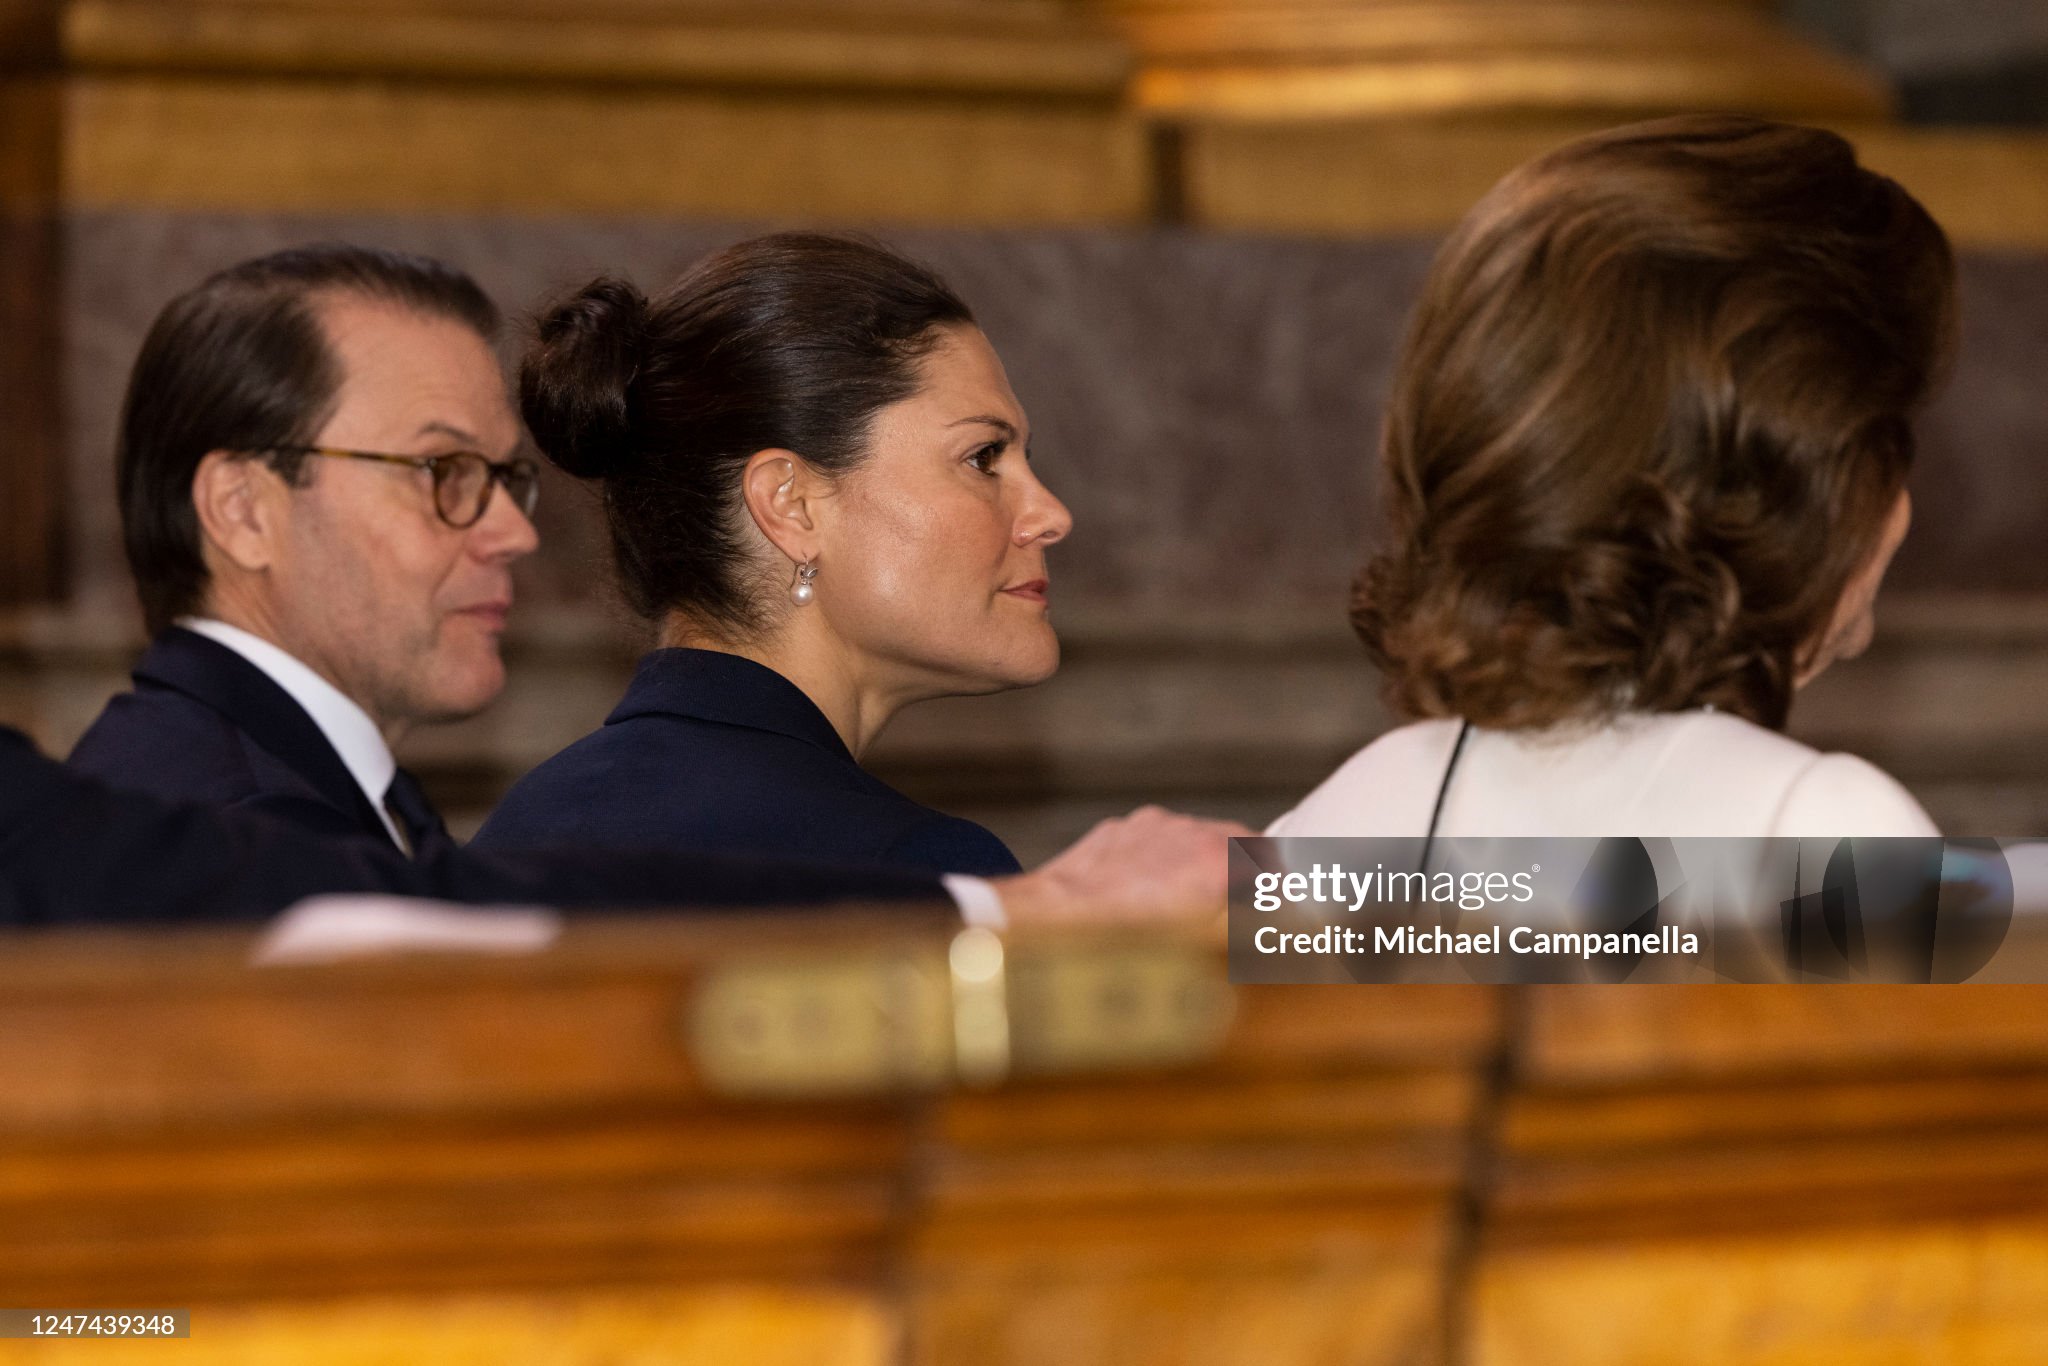 prince-daniel-crown-princess-victoria-and-queen-silvia-of-sweden-attend-a-peace-prayer-marking.jpg